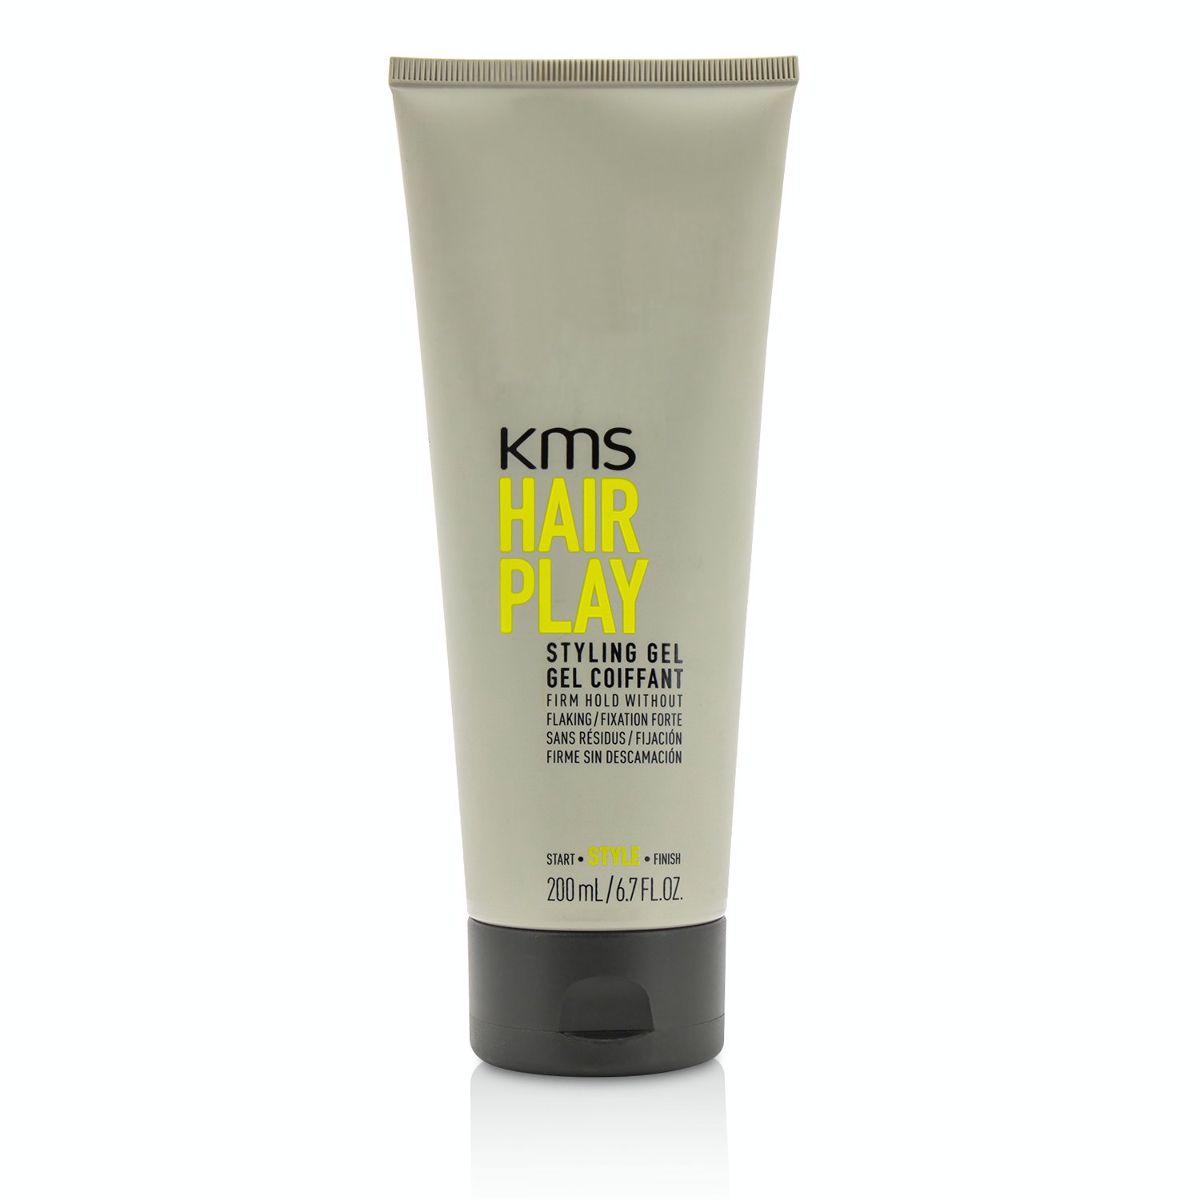 Hair Play Styling Gel (Firm Hold Without Flaking) KMS California Image